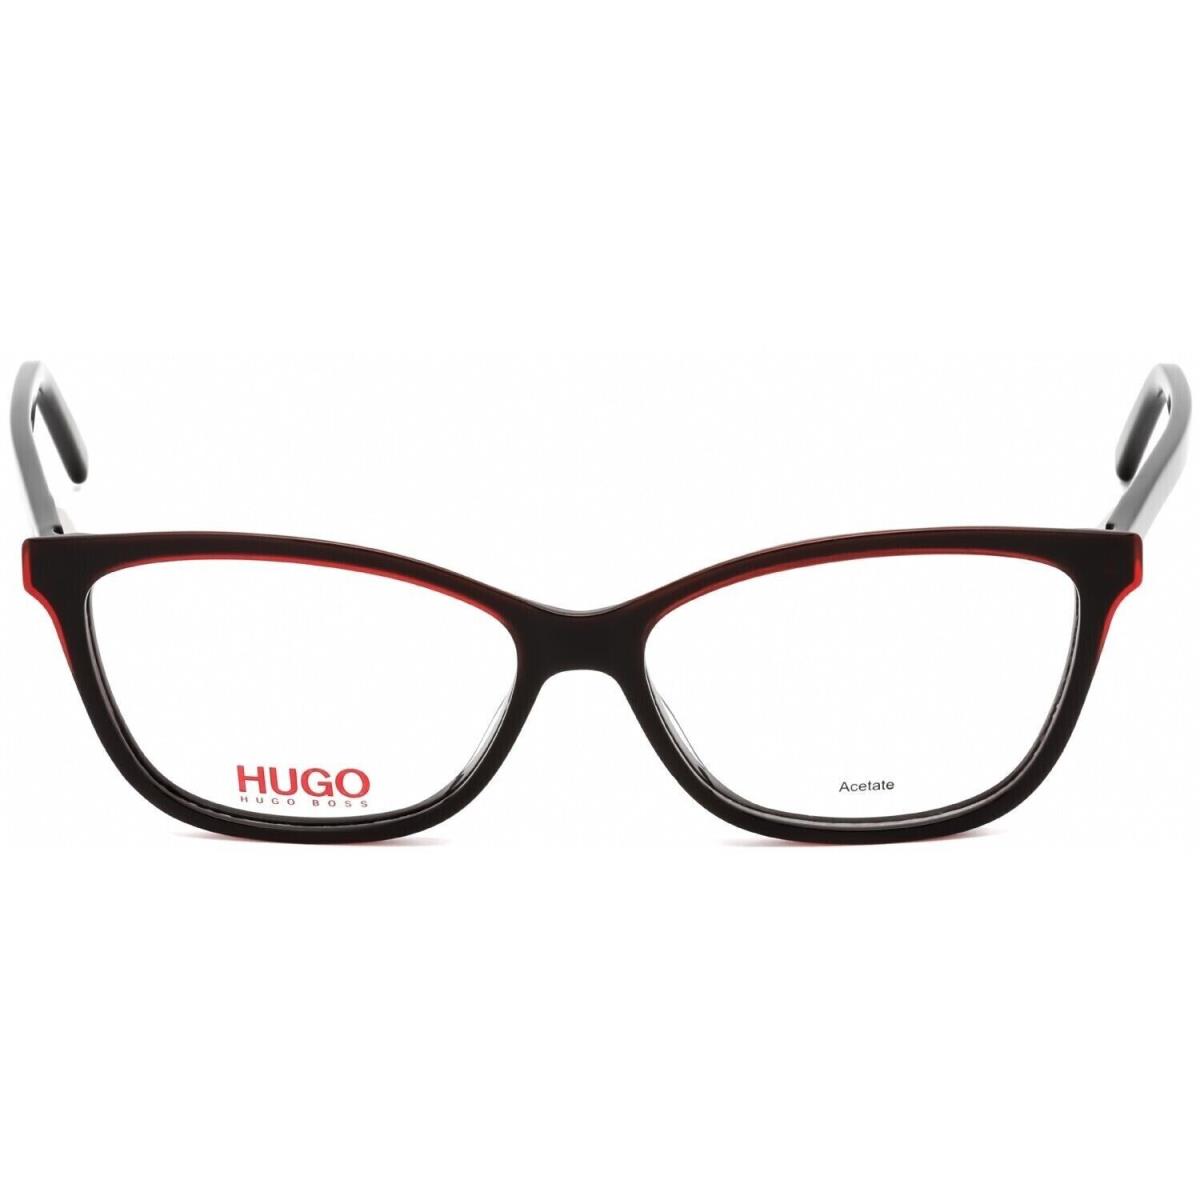 Hugo Boss HG 1053 0OIT - Black with Red Accent 55-15-145 - Frame: Red